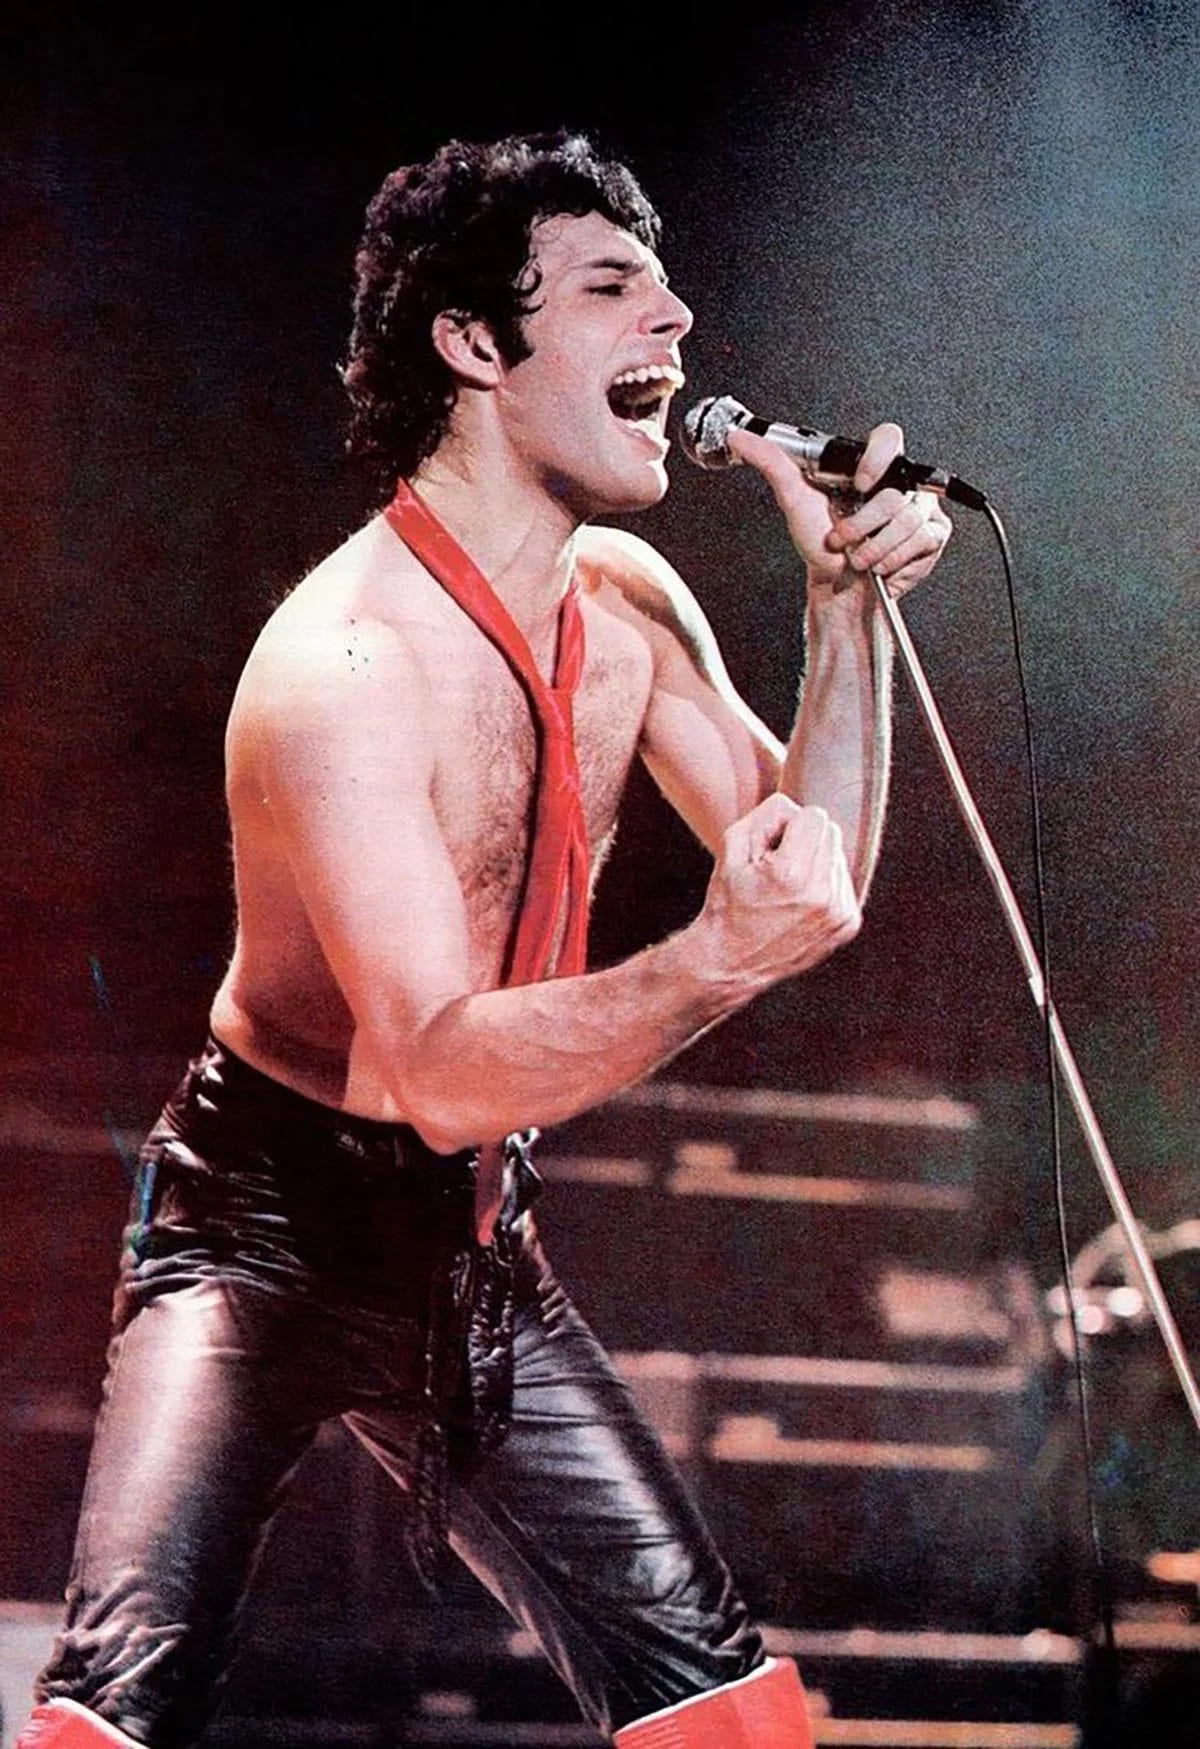 Singer Freddie Mercury of the rock band Queen performs onstage at the Apollo in Manchester, England on November 27, 1978. Photo: Kevin Cummins